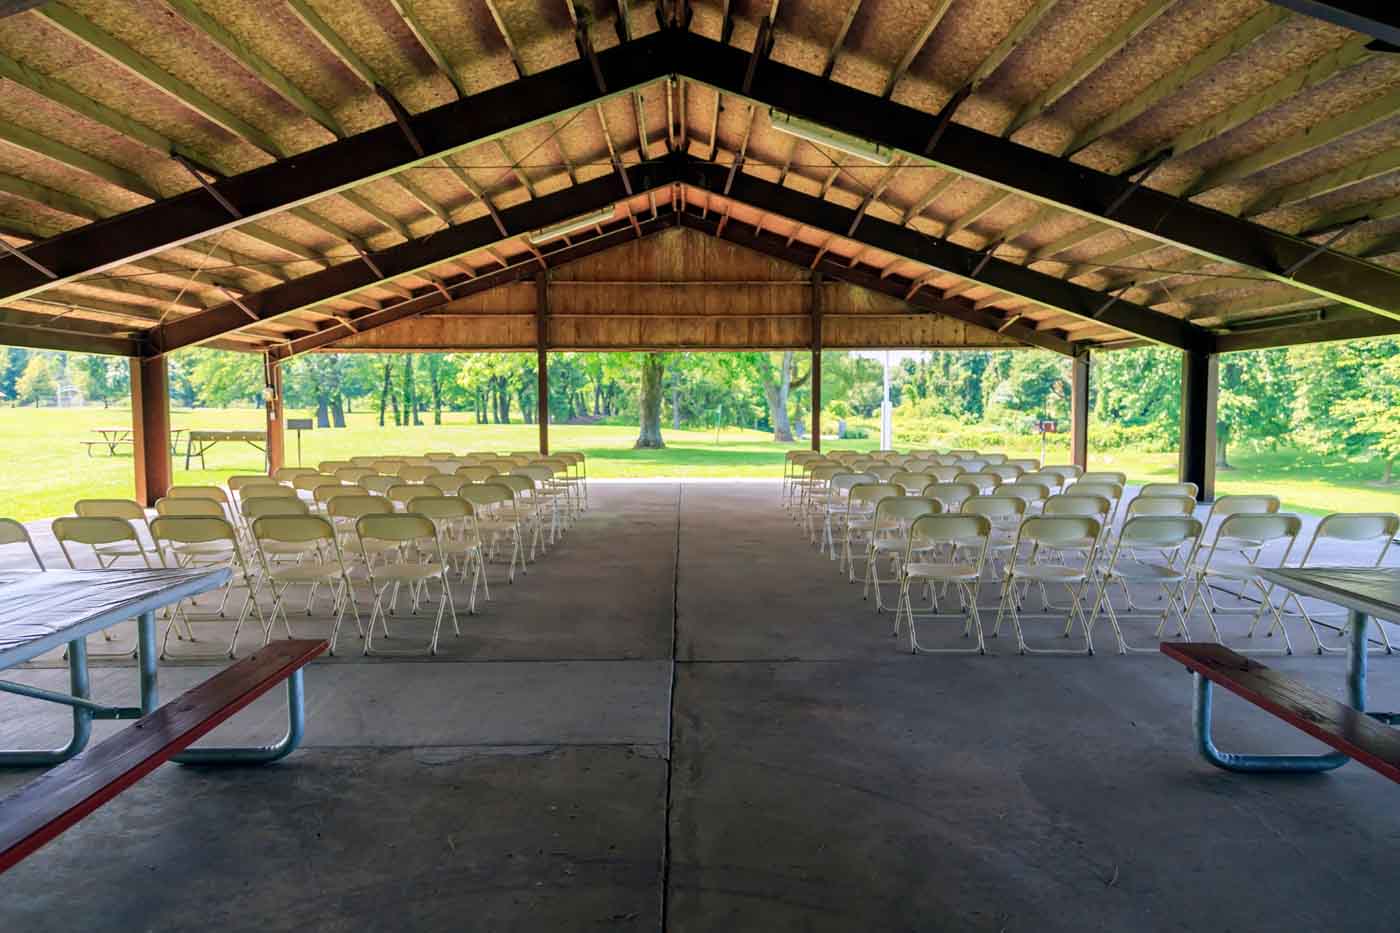 A picnic shelter set up for a wedding ceremony with many rows of white folding chairs. Shot from behind.